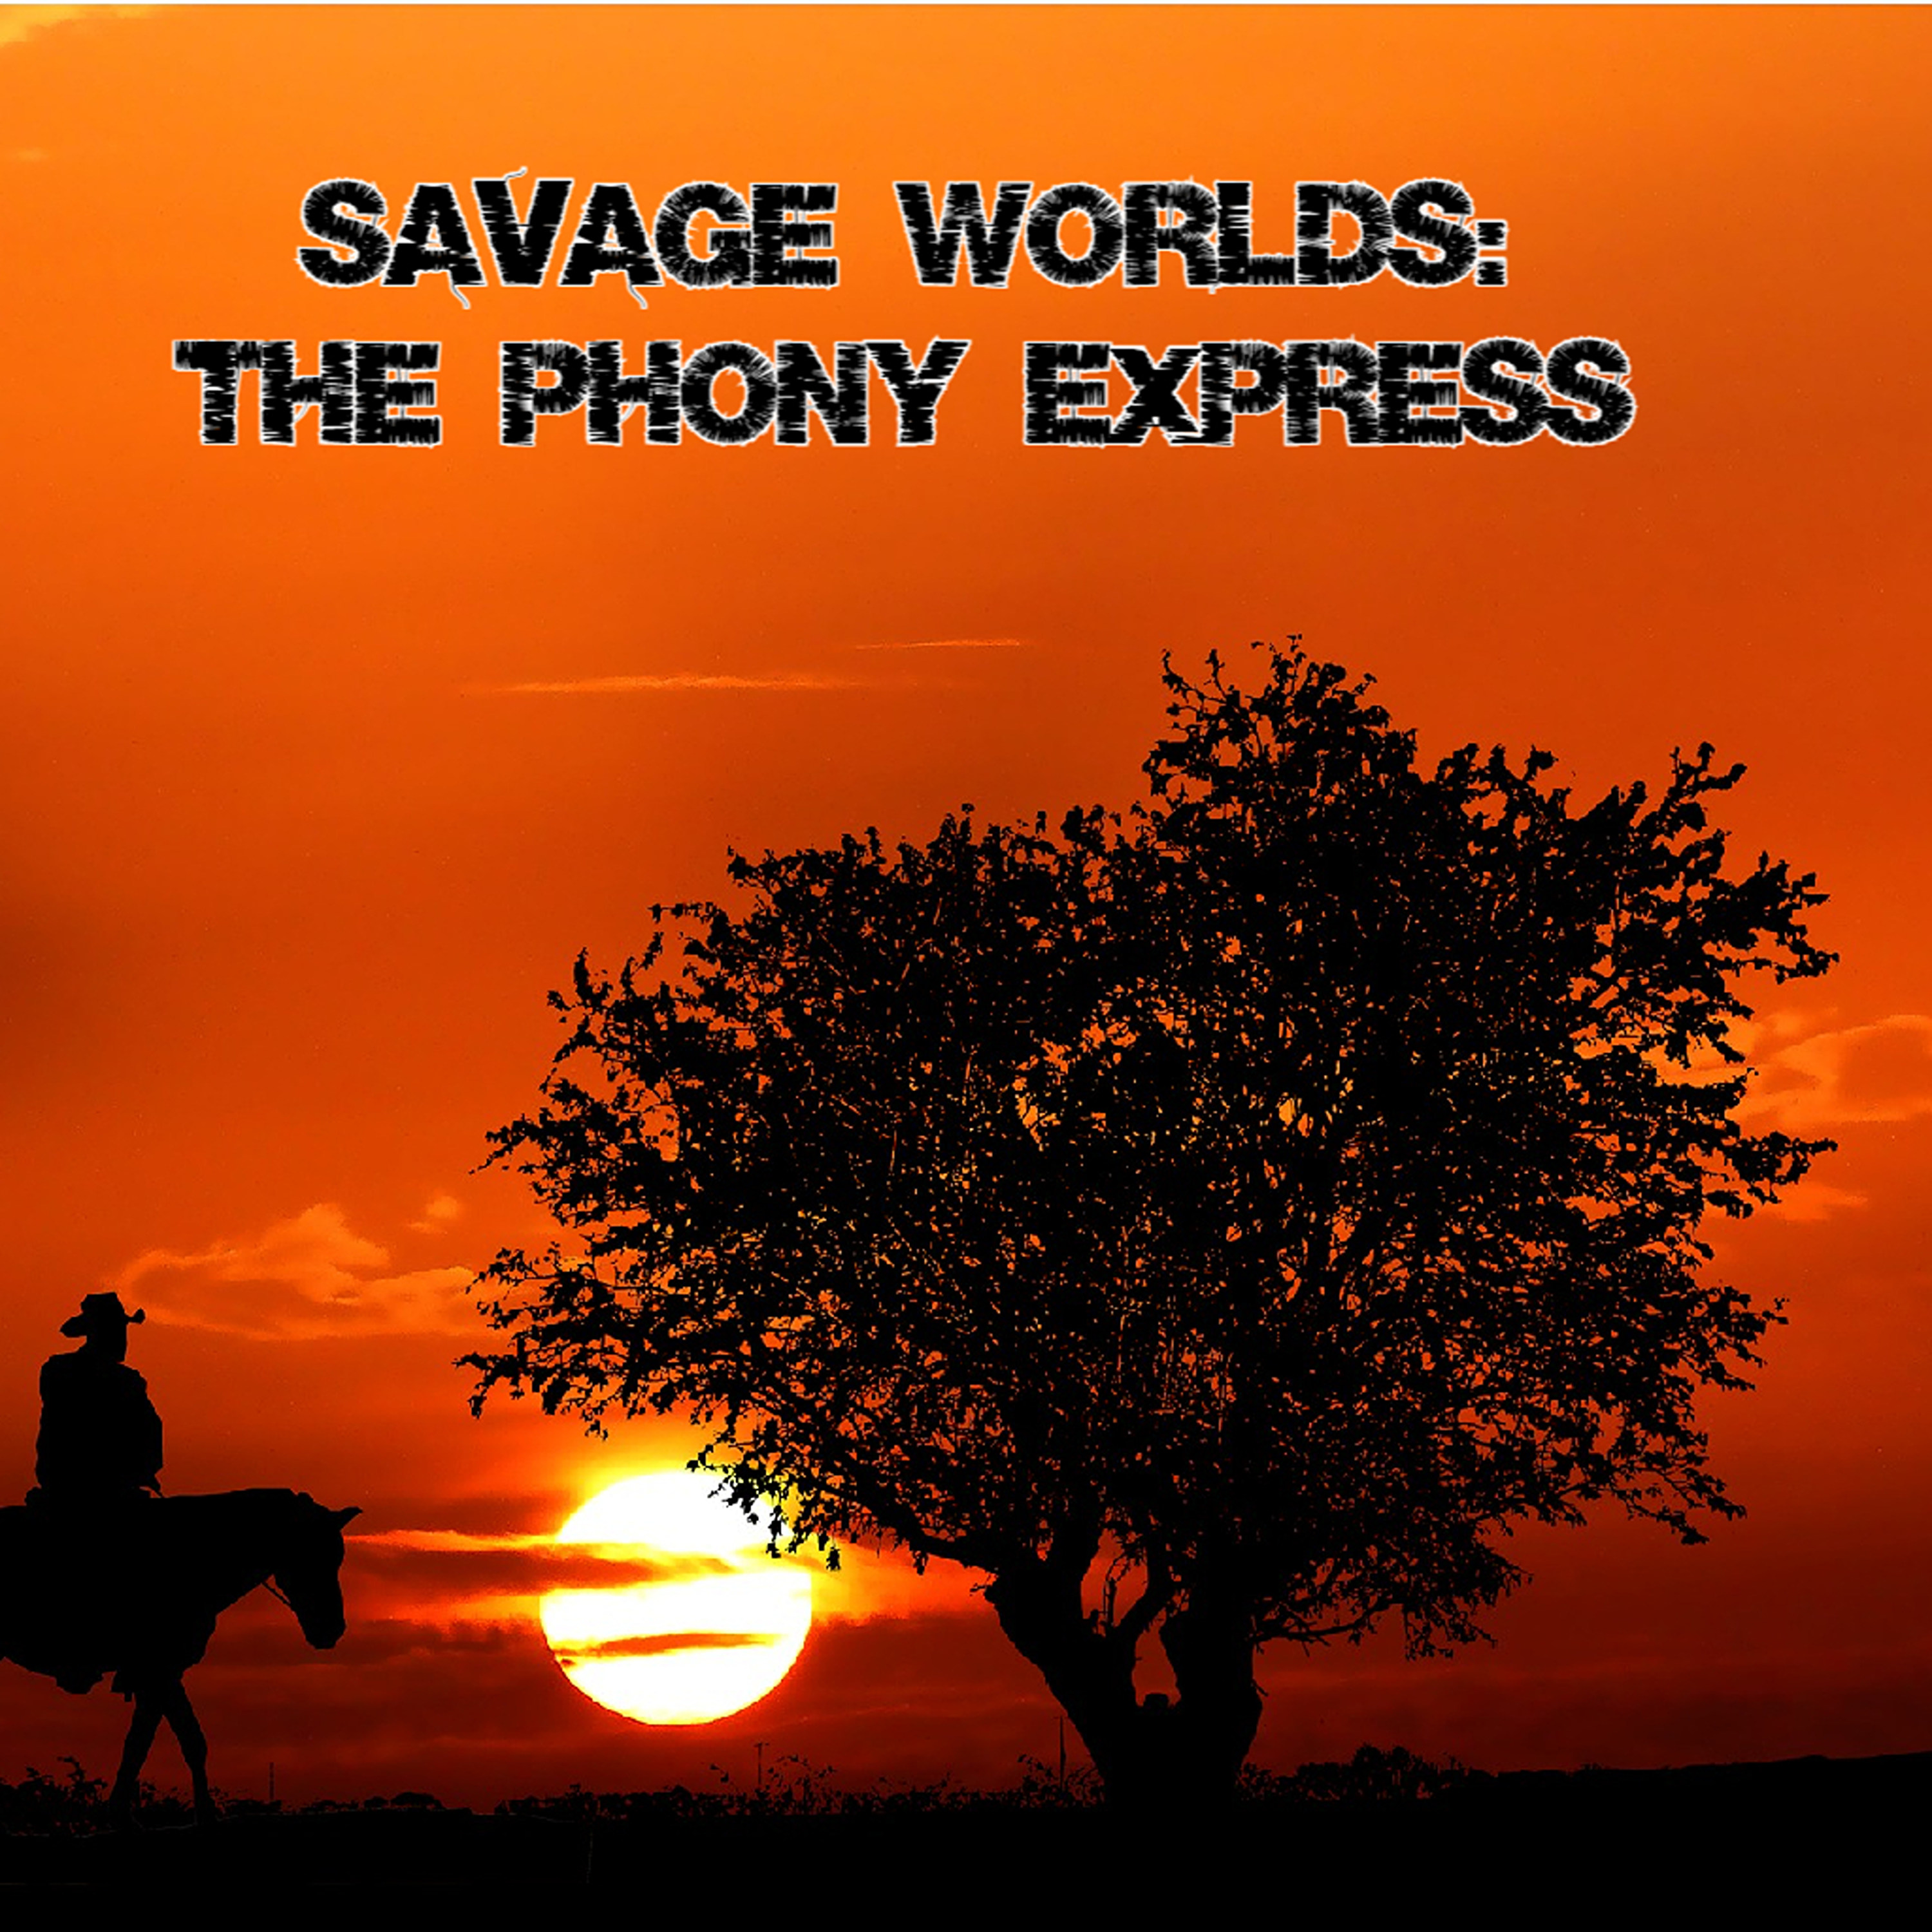 Savage Worlds - The Phony Express 1.12: Mech Up to Break Up!